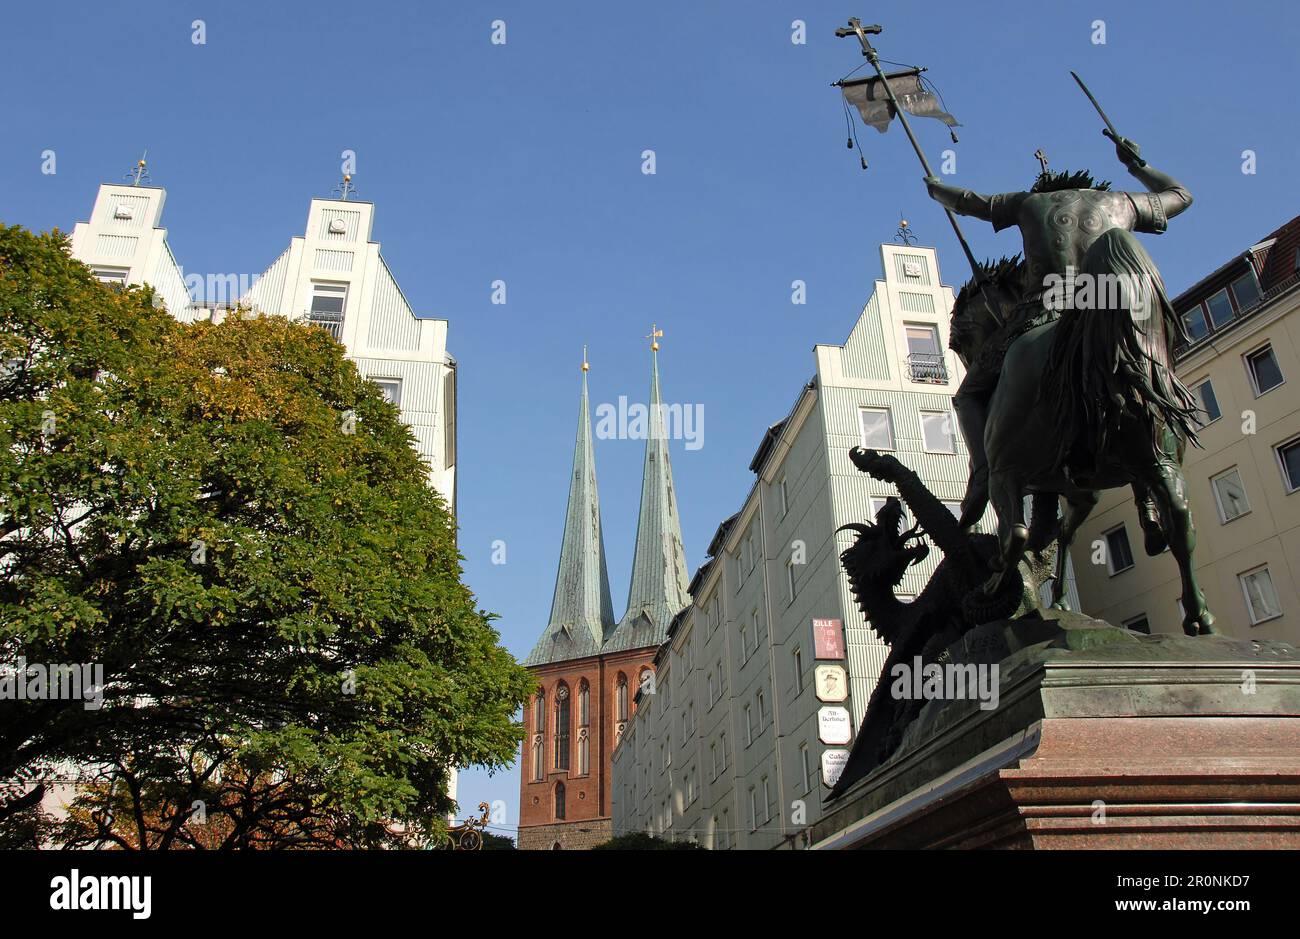 Berlin, Germany: Statue of Saint George slaying a dragon in the Nikolai Quarter, the old part of the city. Stock Photo